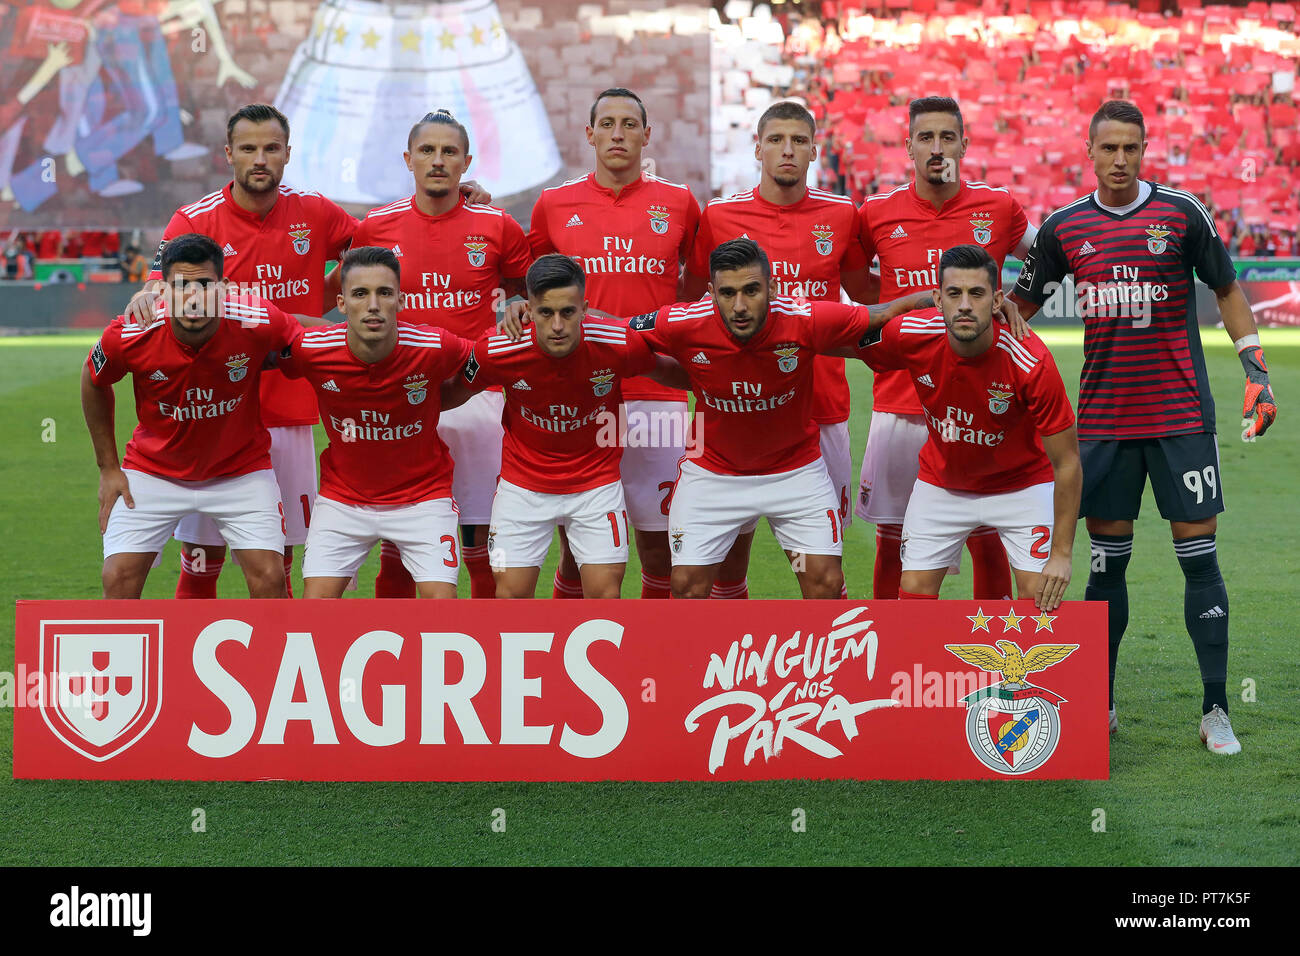 Fc porto vs benfica hi-res stock photography and images - Alamy